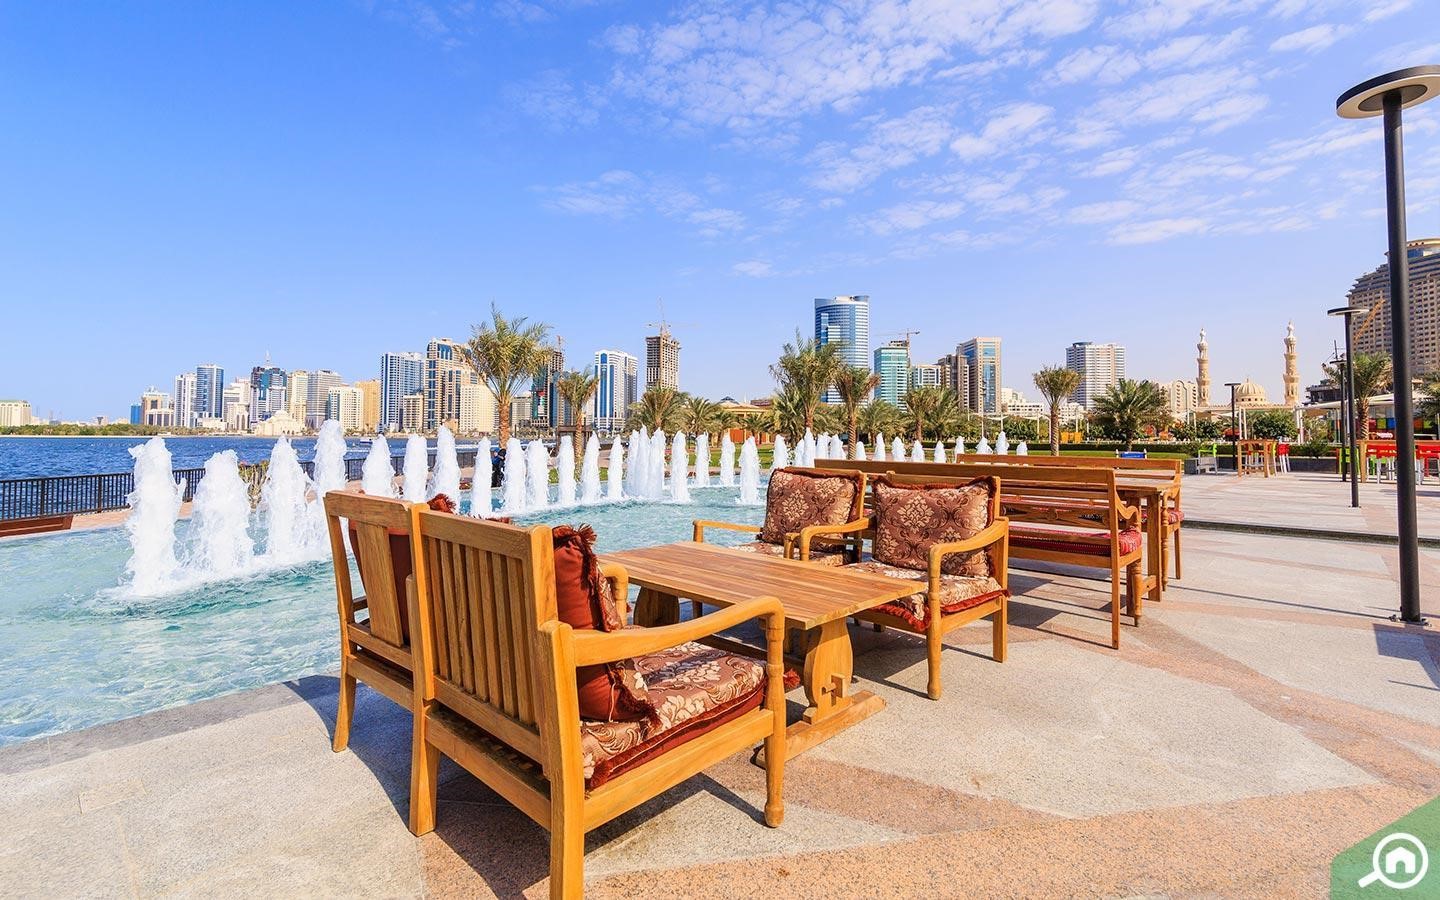 Top areas to rent 2-bed apartments in Sharjah under AED 35k - TNG